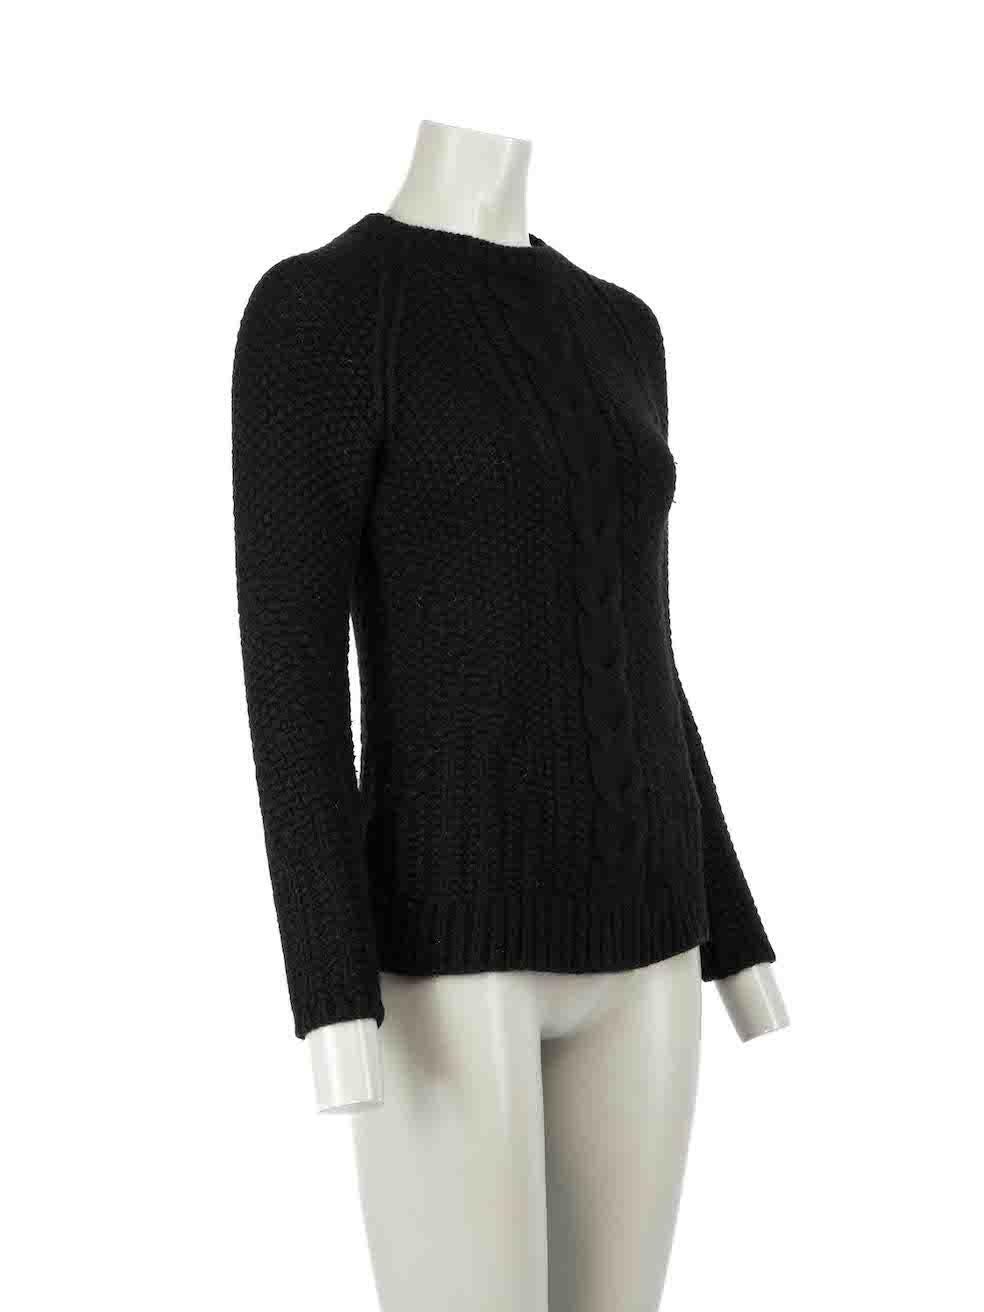 CONDITION is Good. Minor wear to knitwear is evident. Light wear to the knit surface where noticeable pilling can be seen throughout on this used The Row designer resale item.
 
 Details
 Black Cable Knit Wool Jumper
 Regular fit
 Heavy weight
